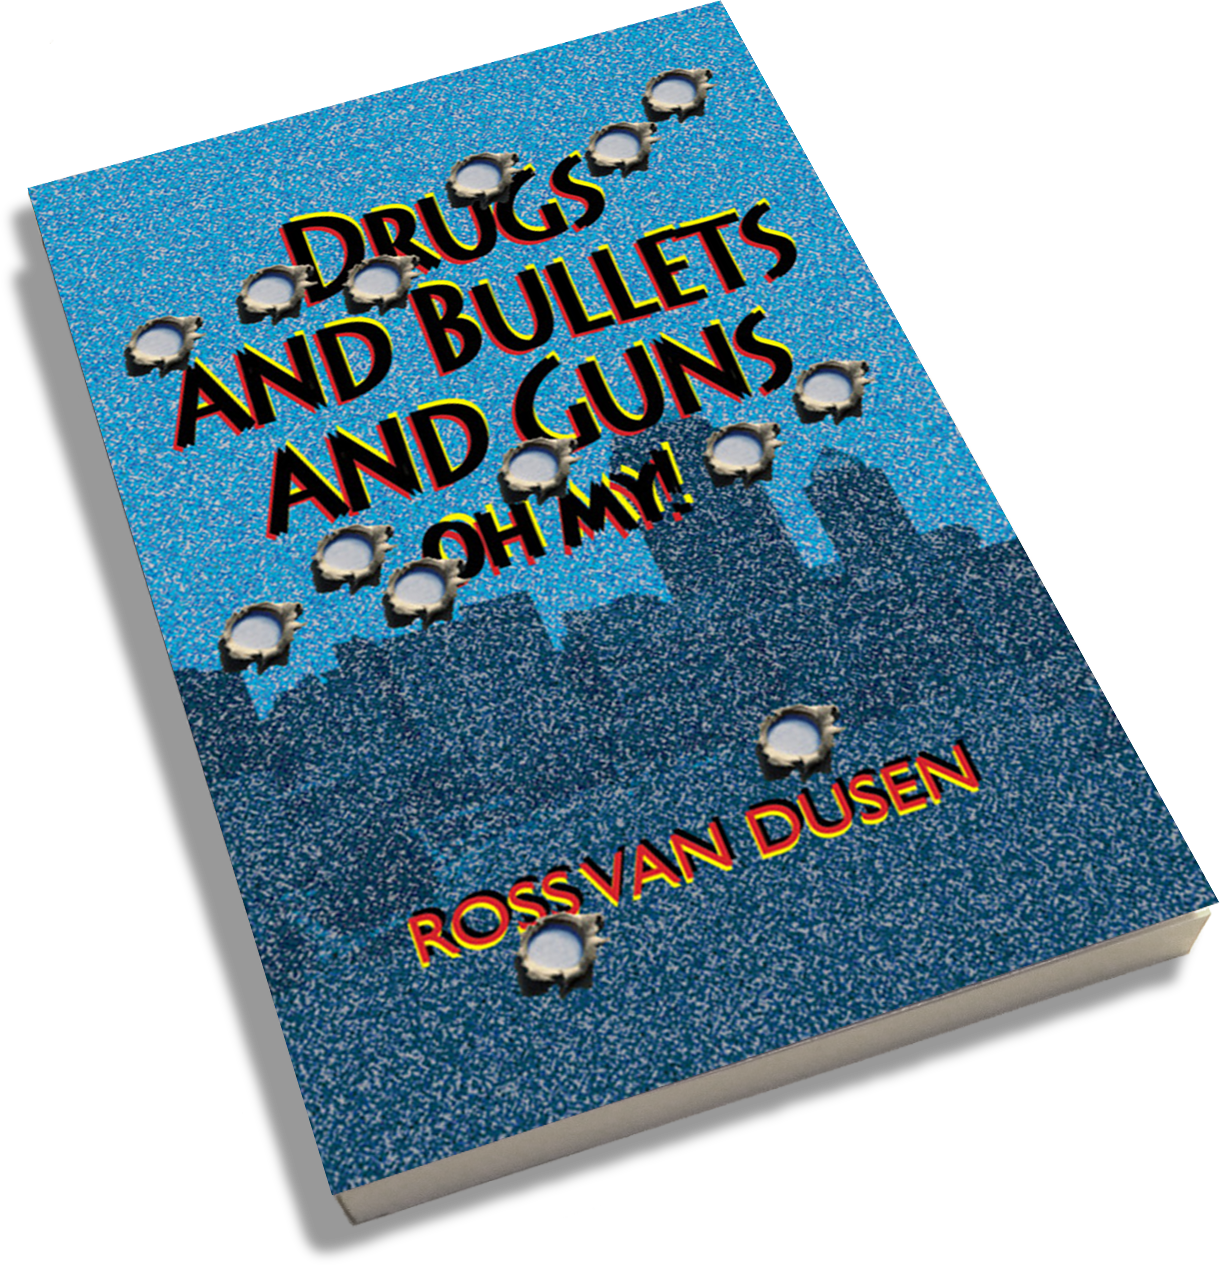 Drugs And Guns And Bullets, Oh My! book